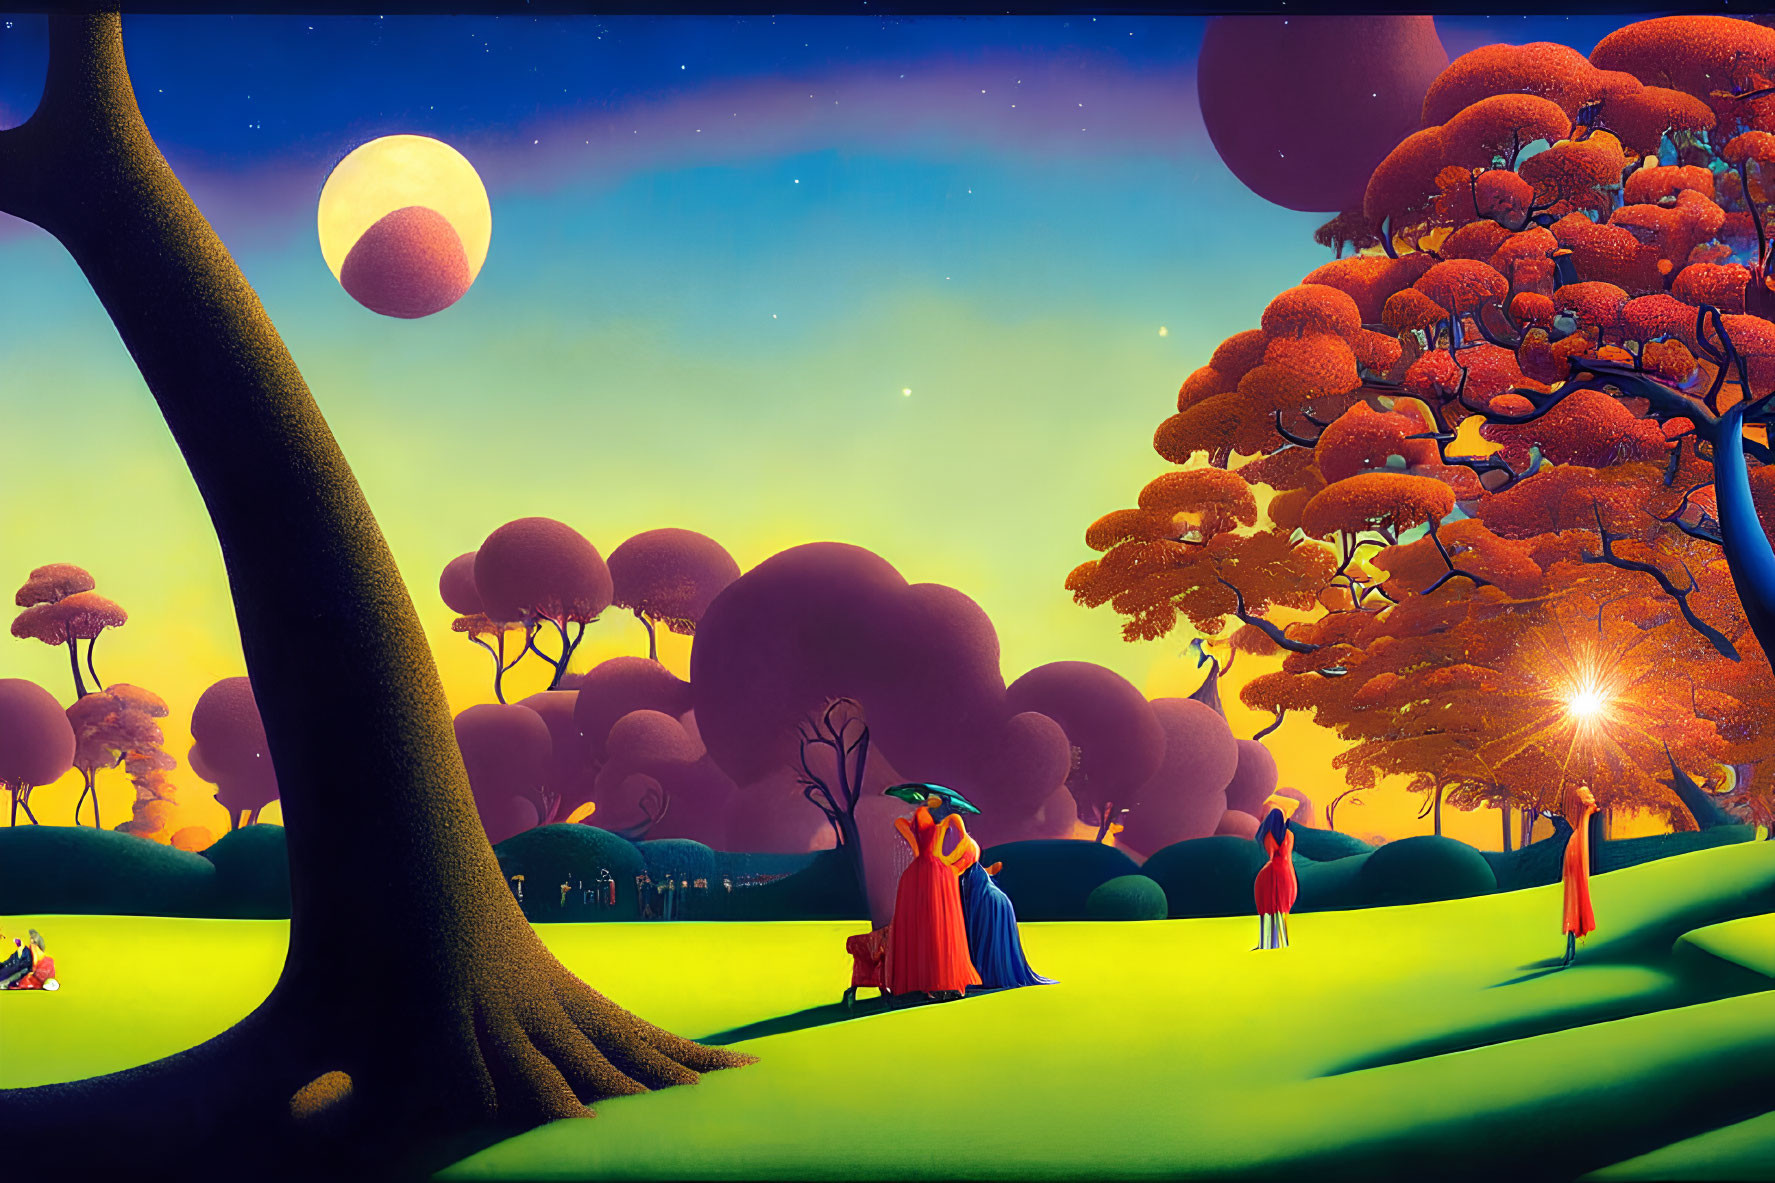 Colorful artwork of enchanting twilight landscape with moon, people in red, whimsical trees, glowing